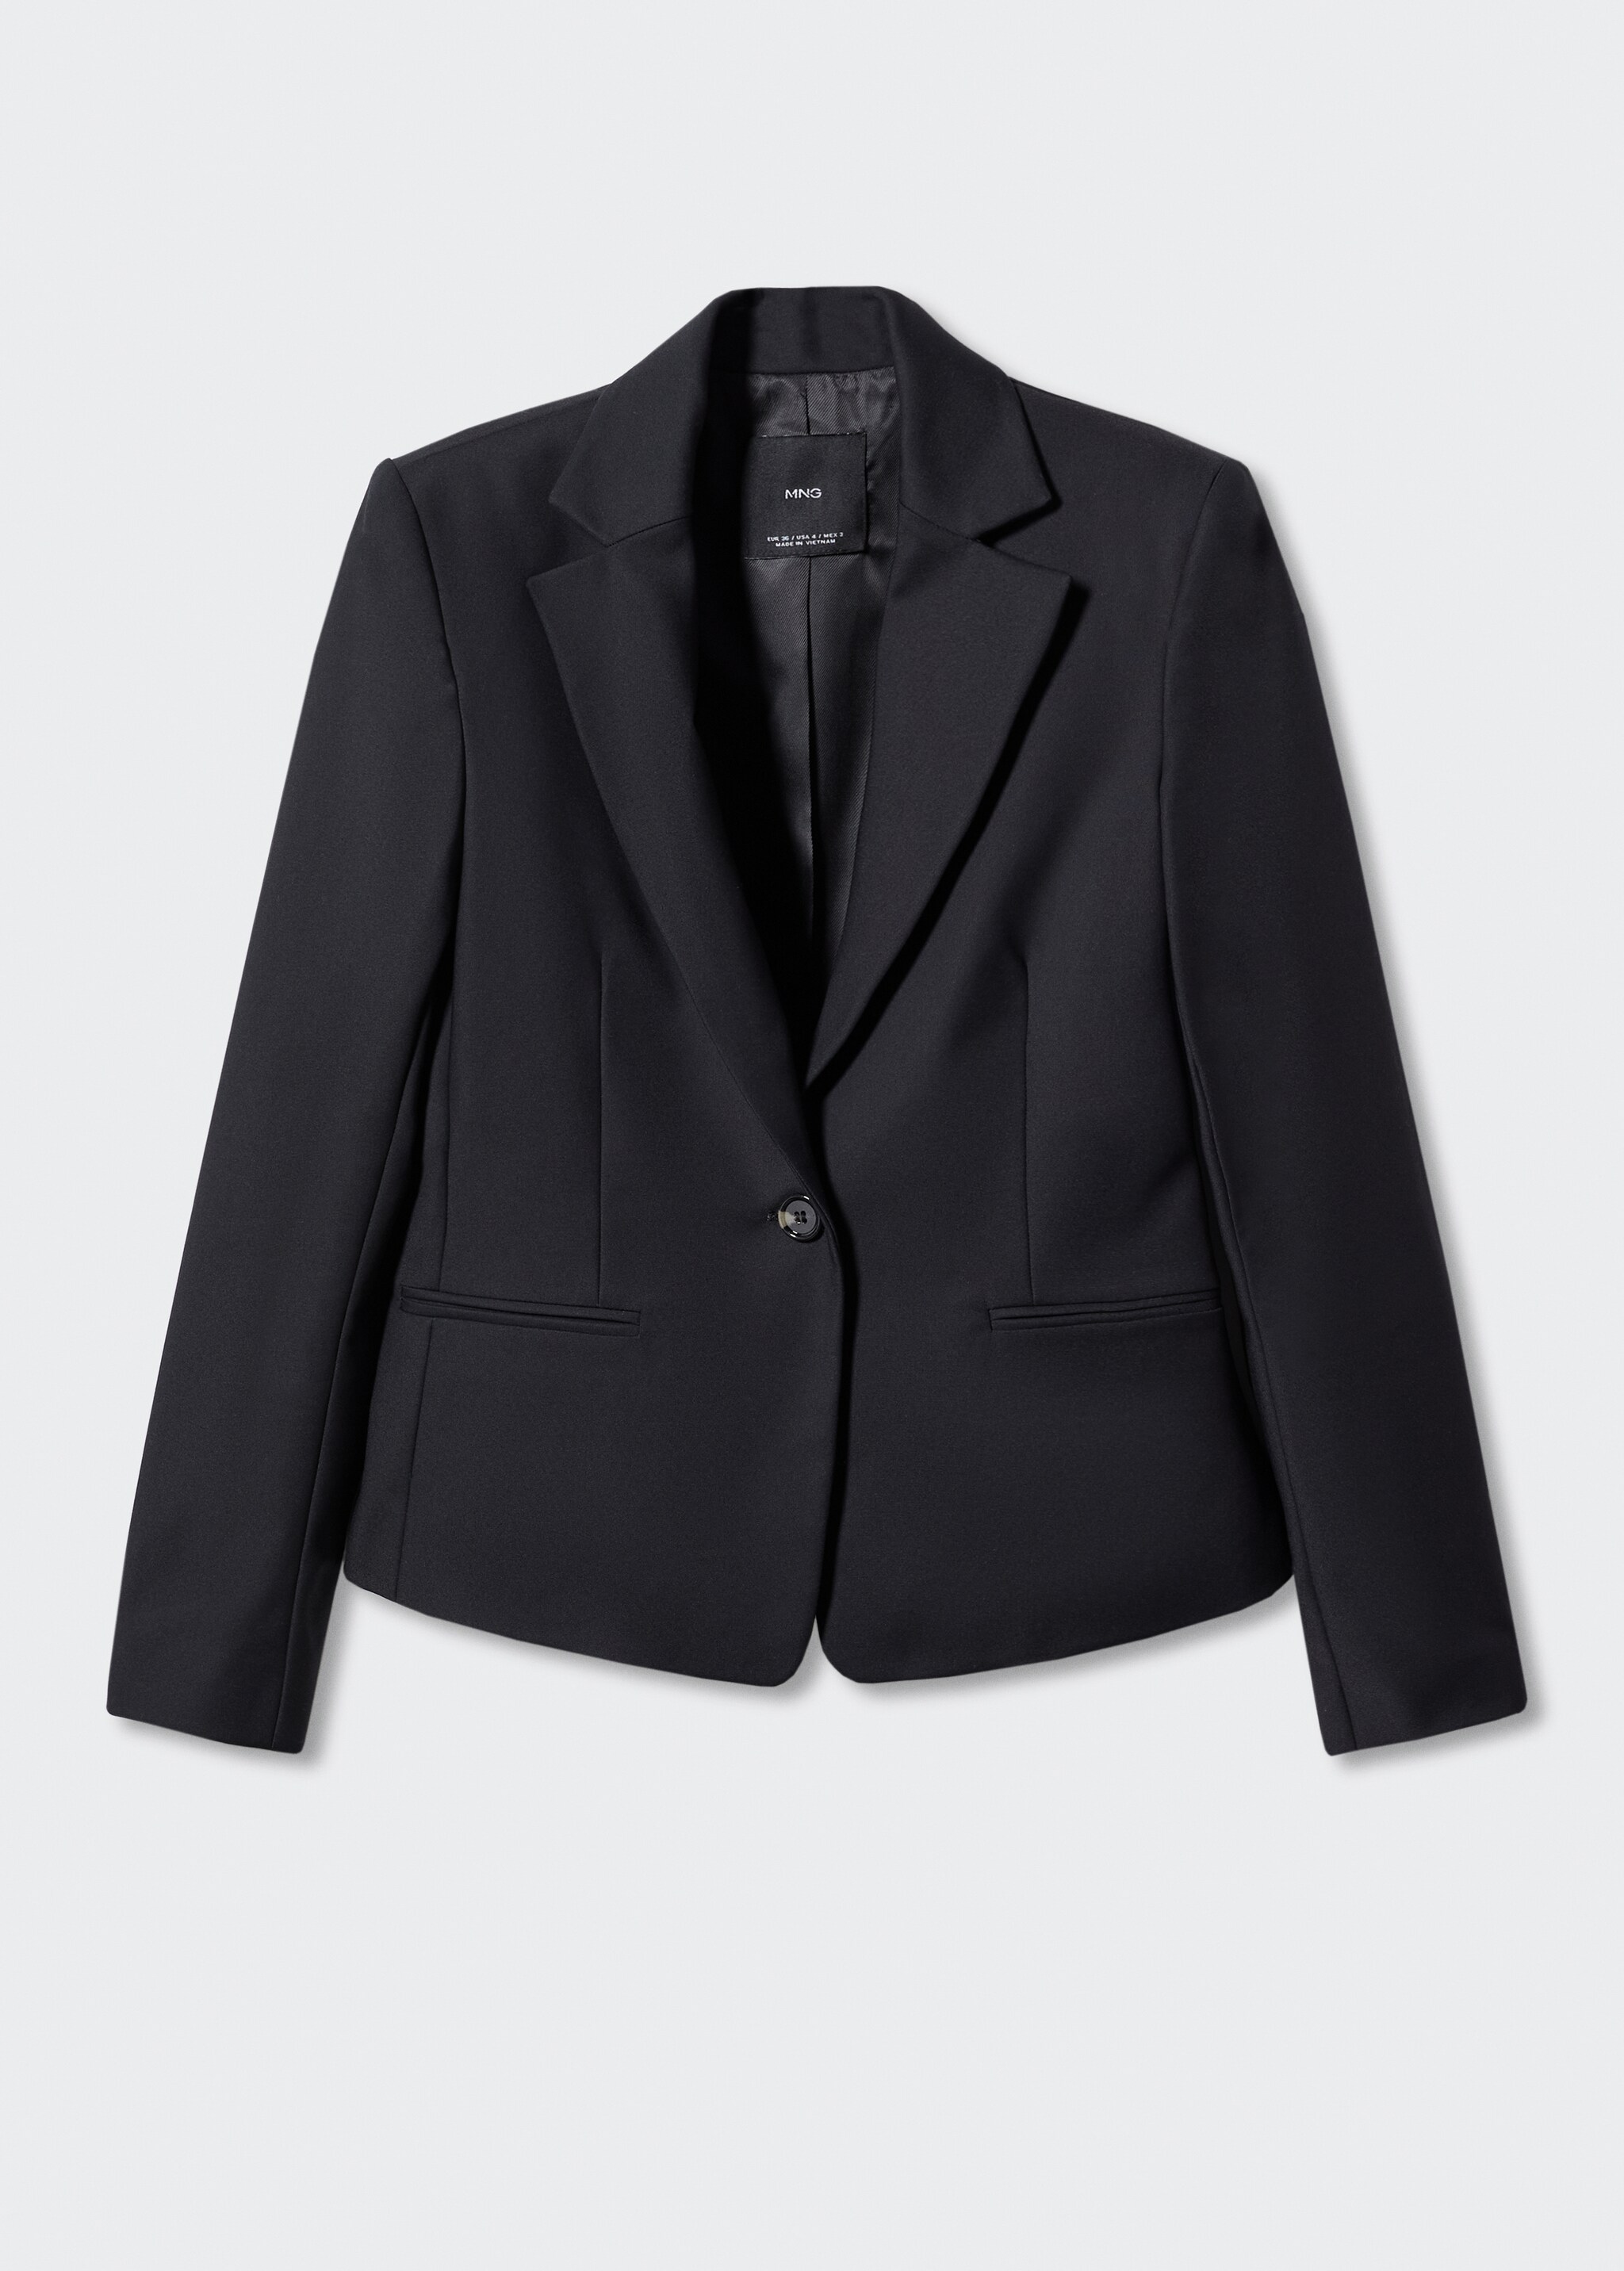 Structured suit blazer - Article without model